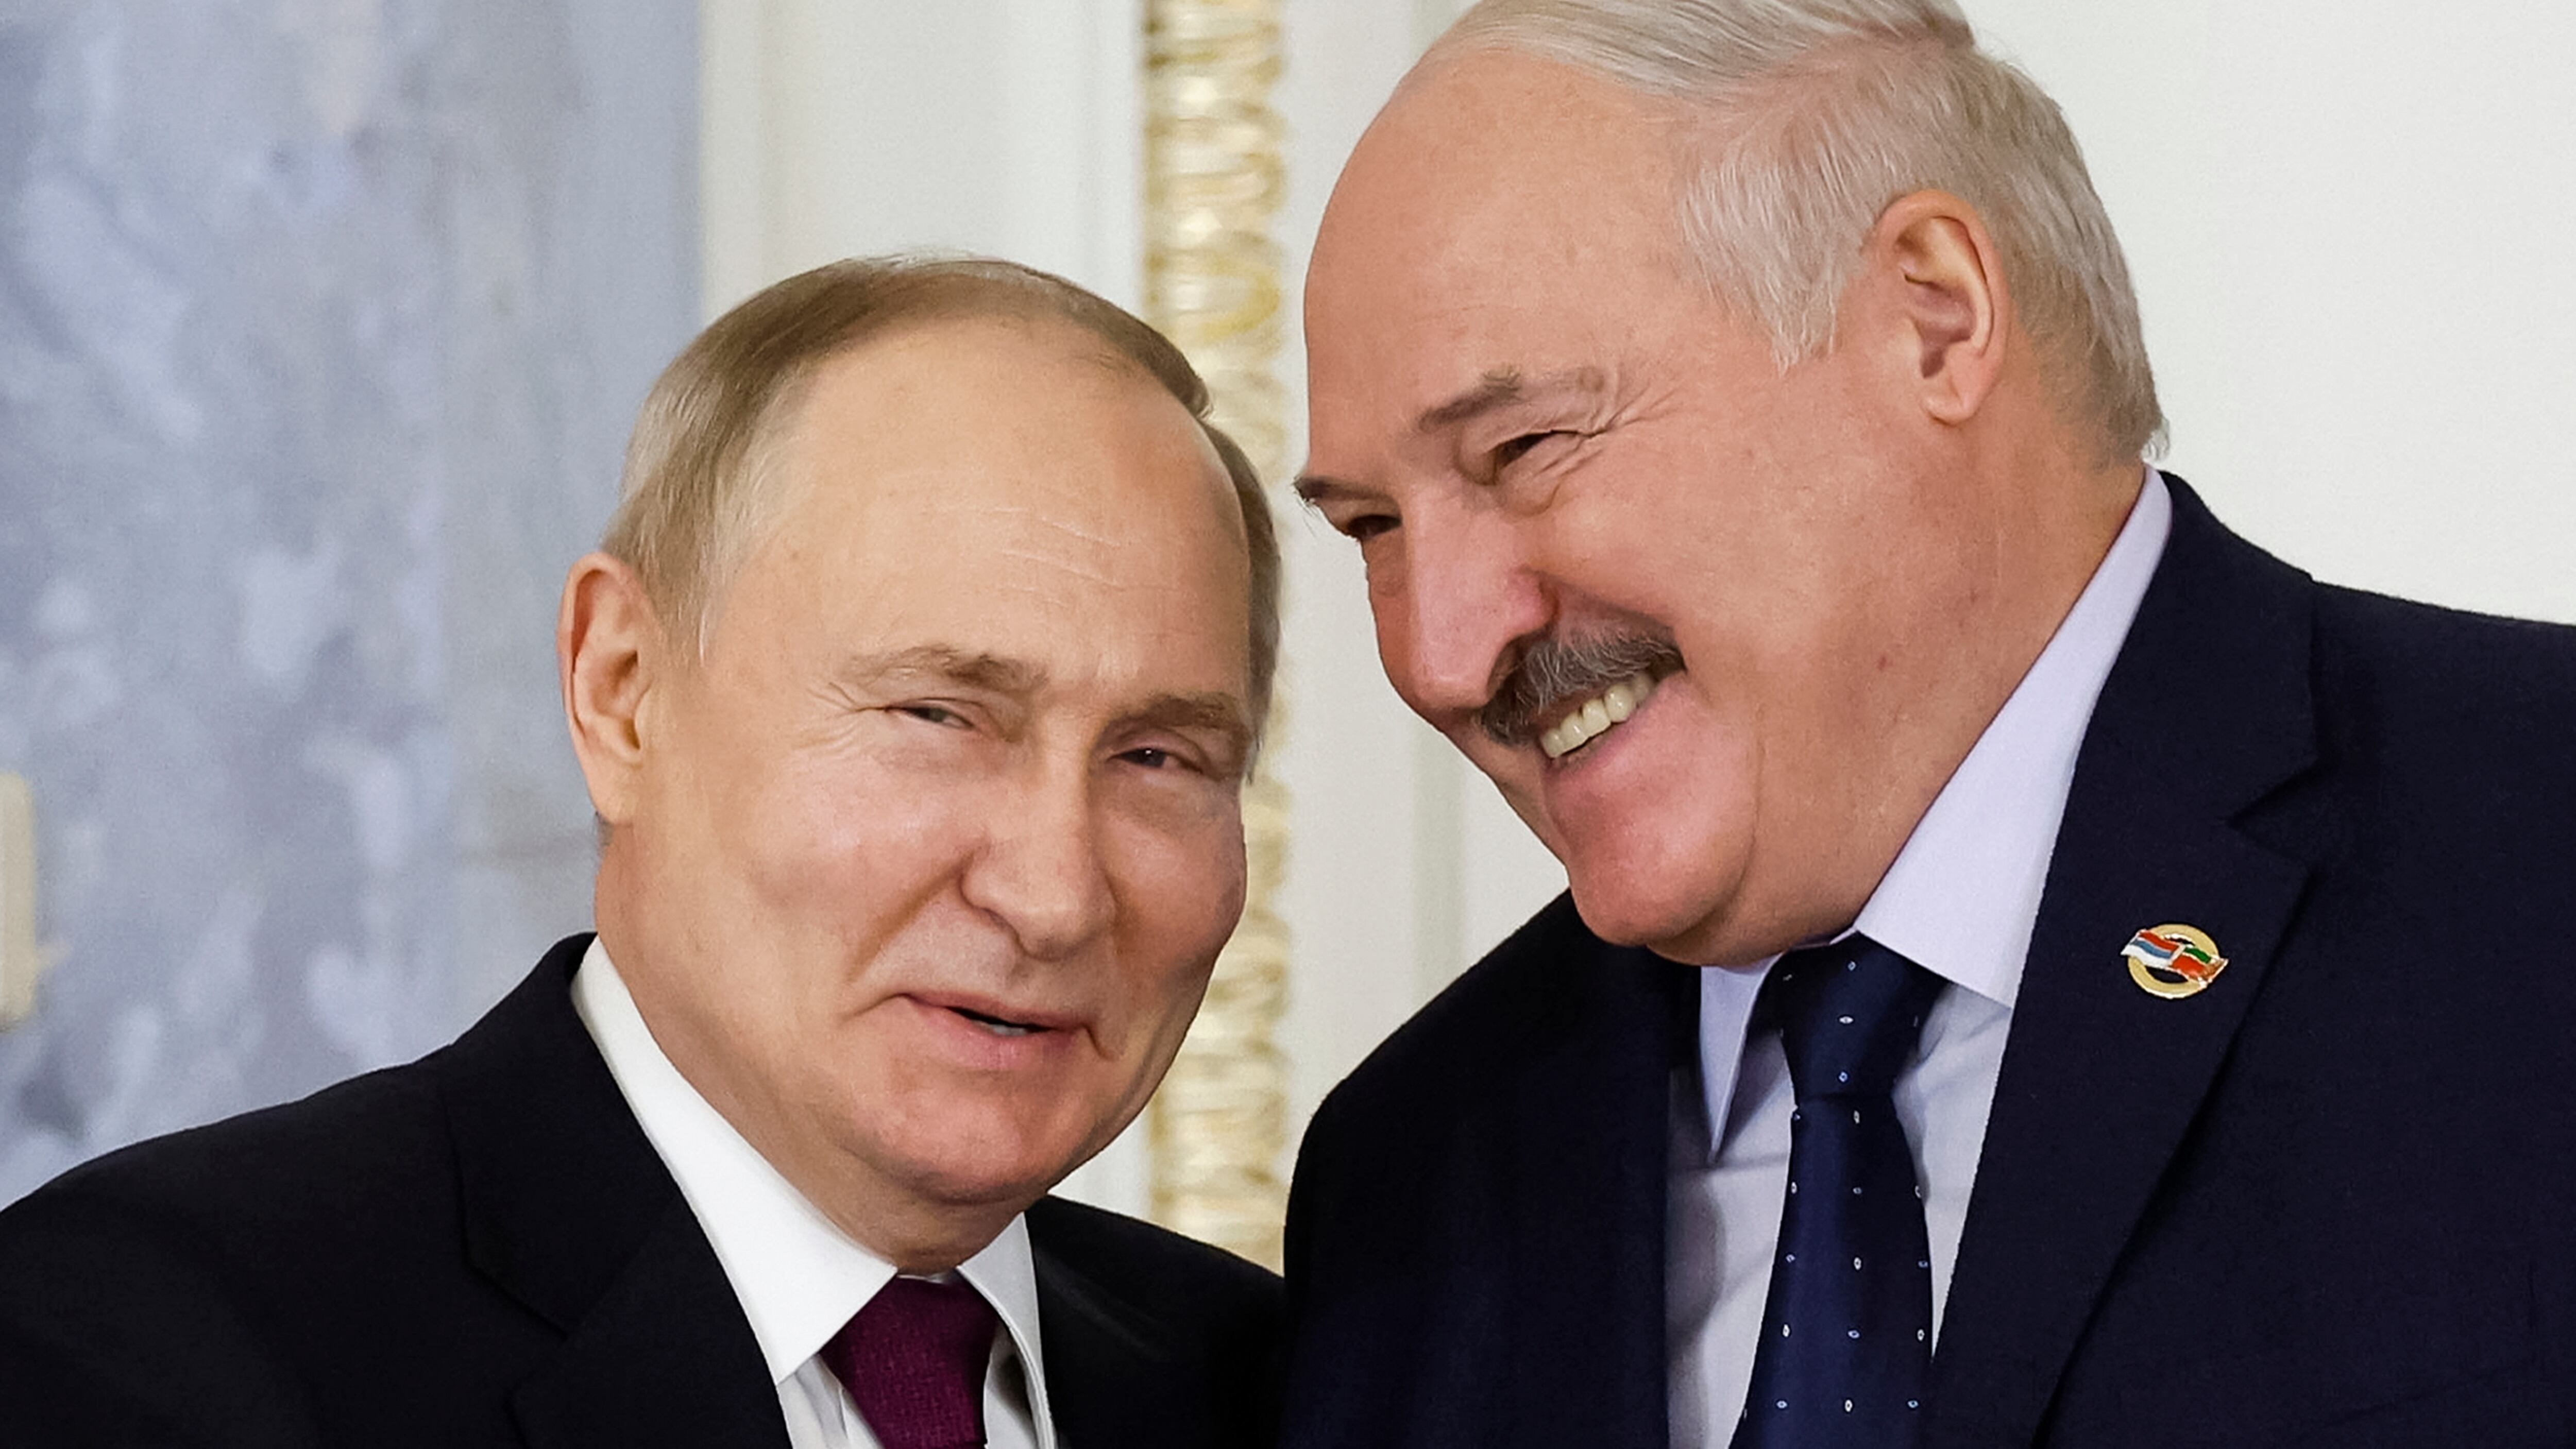 Russian President Vladimir Putin and Belarus President Alexander Lukashenko shake hands during a meeting of the Union State Supreme Council in St Petersburg, Russia, on Monday (Dmitry Astakhov, Sputnik, Government Pool Photo via AP)